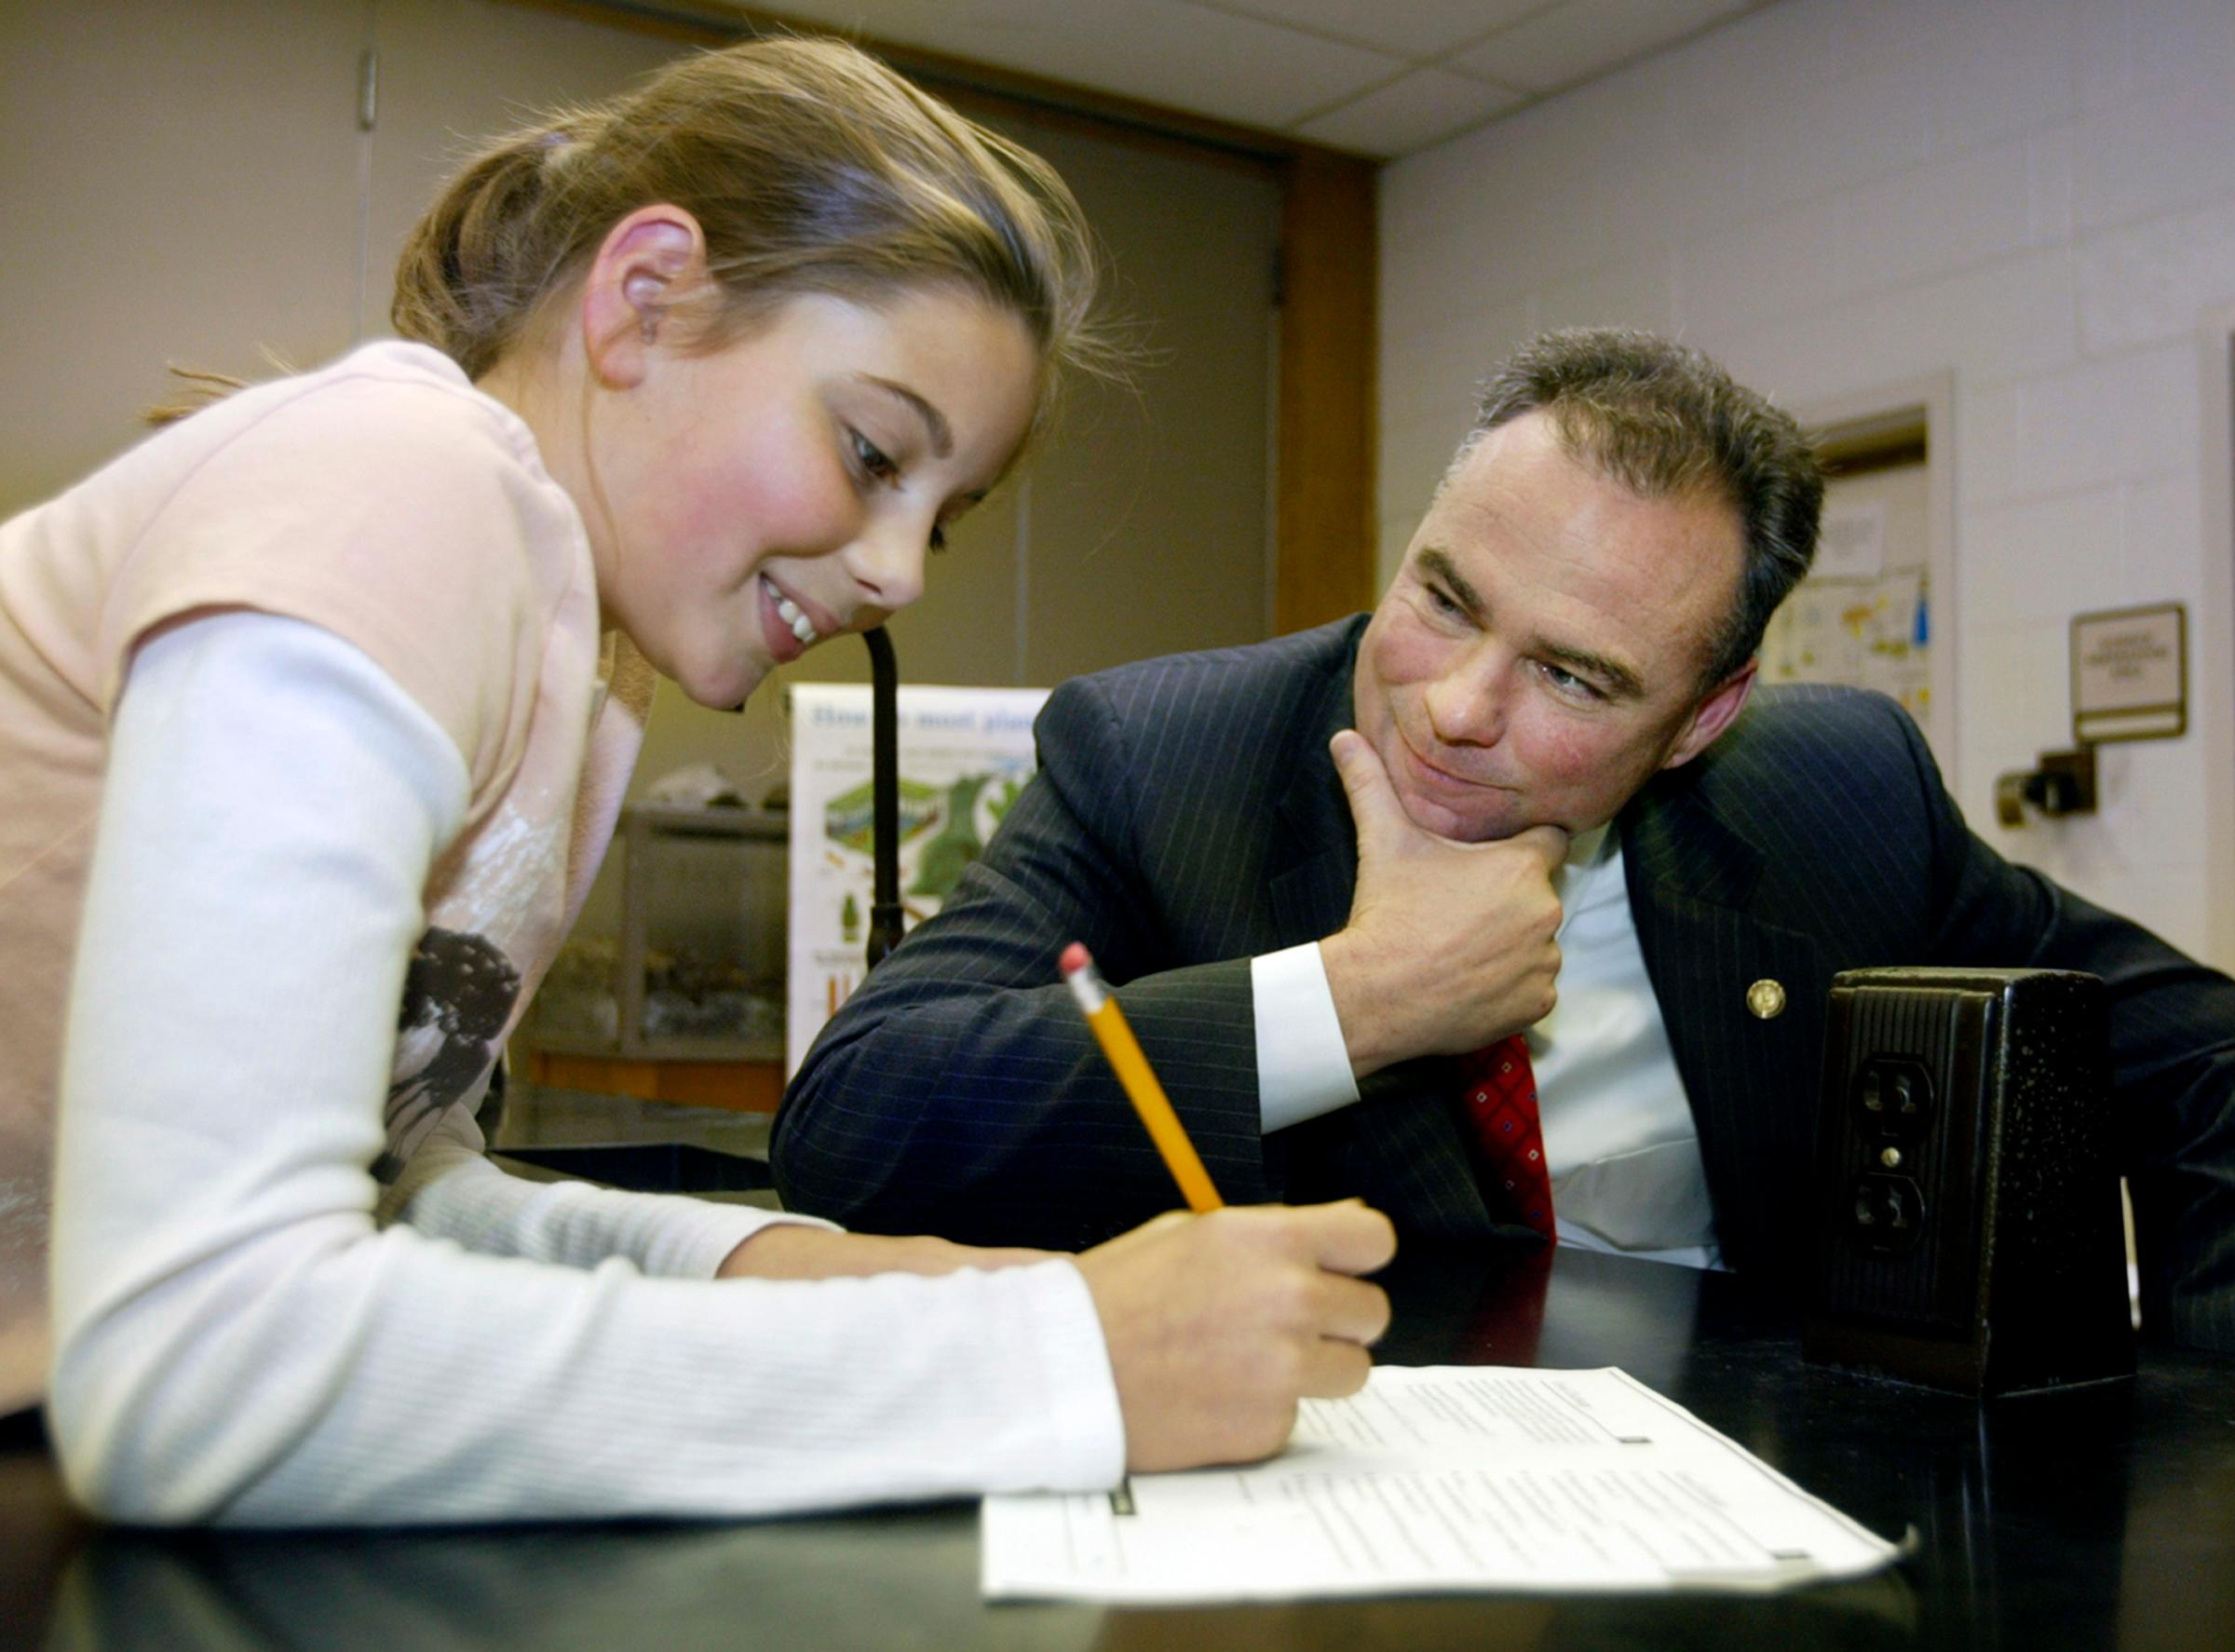 Virginia Gov. Tim Kaine and Aylor Middle School student Ryan Magalis, 11, left, work together on a word game in a gifted resource enlightment study hall at the school in Stephens City, Va. on Oct. 17, 2006.